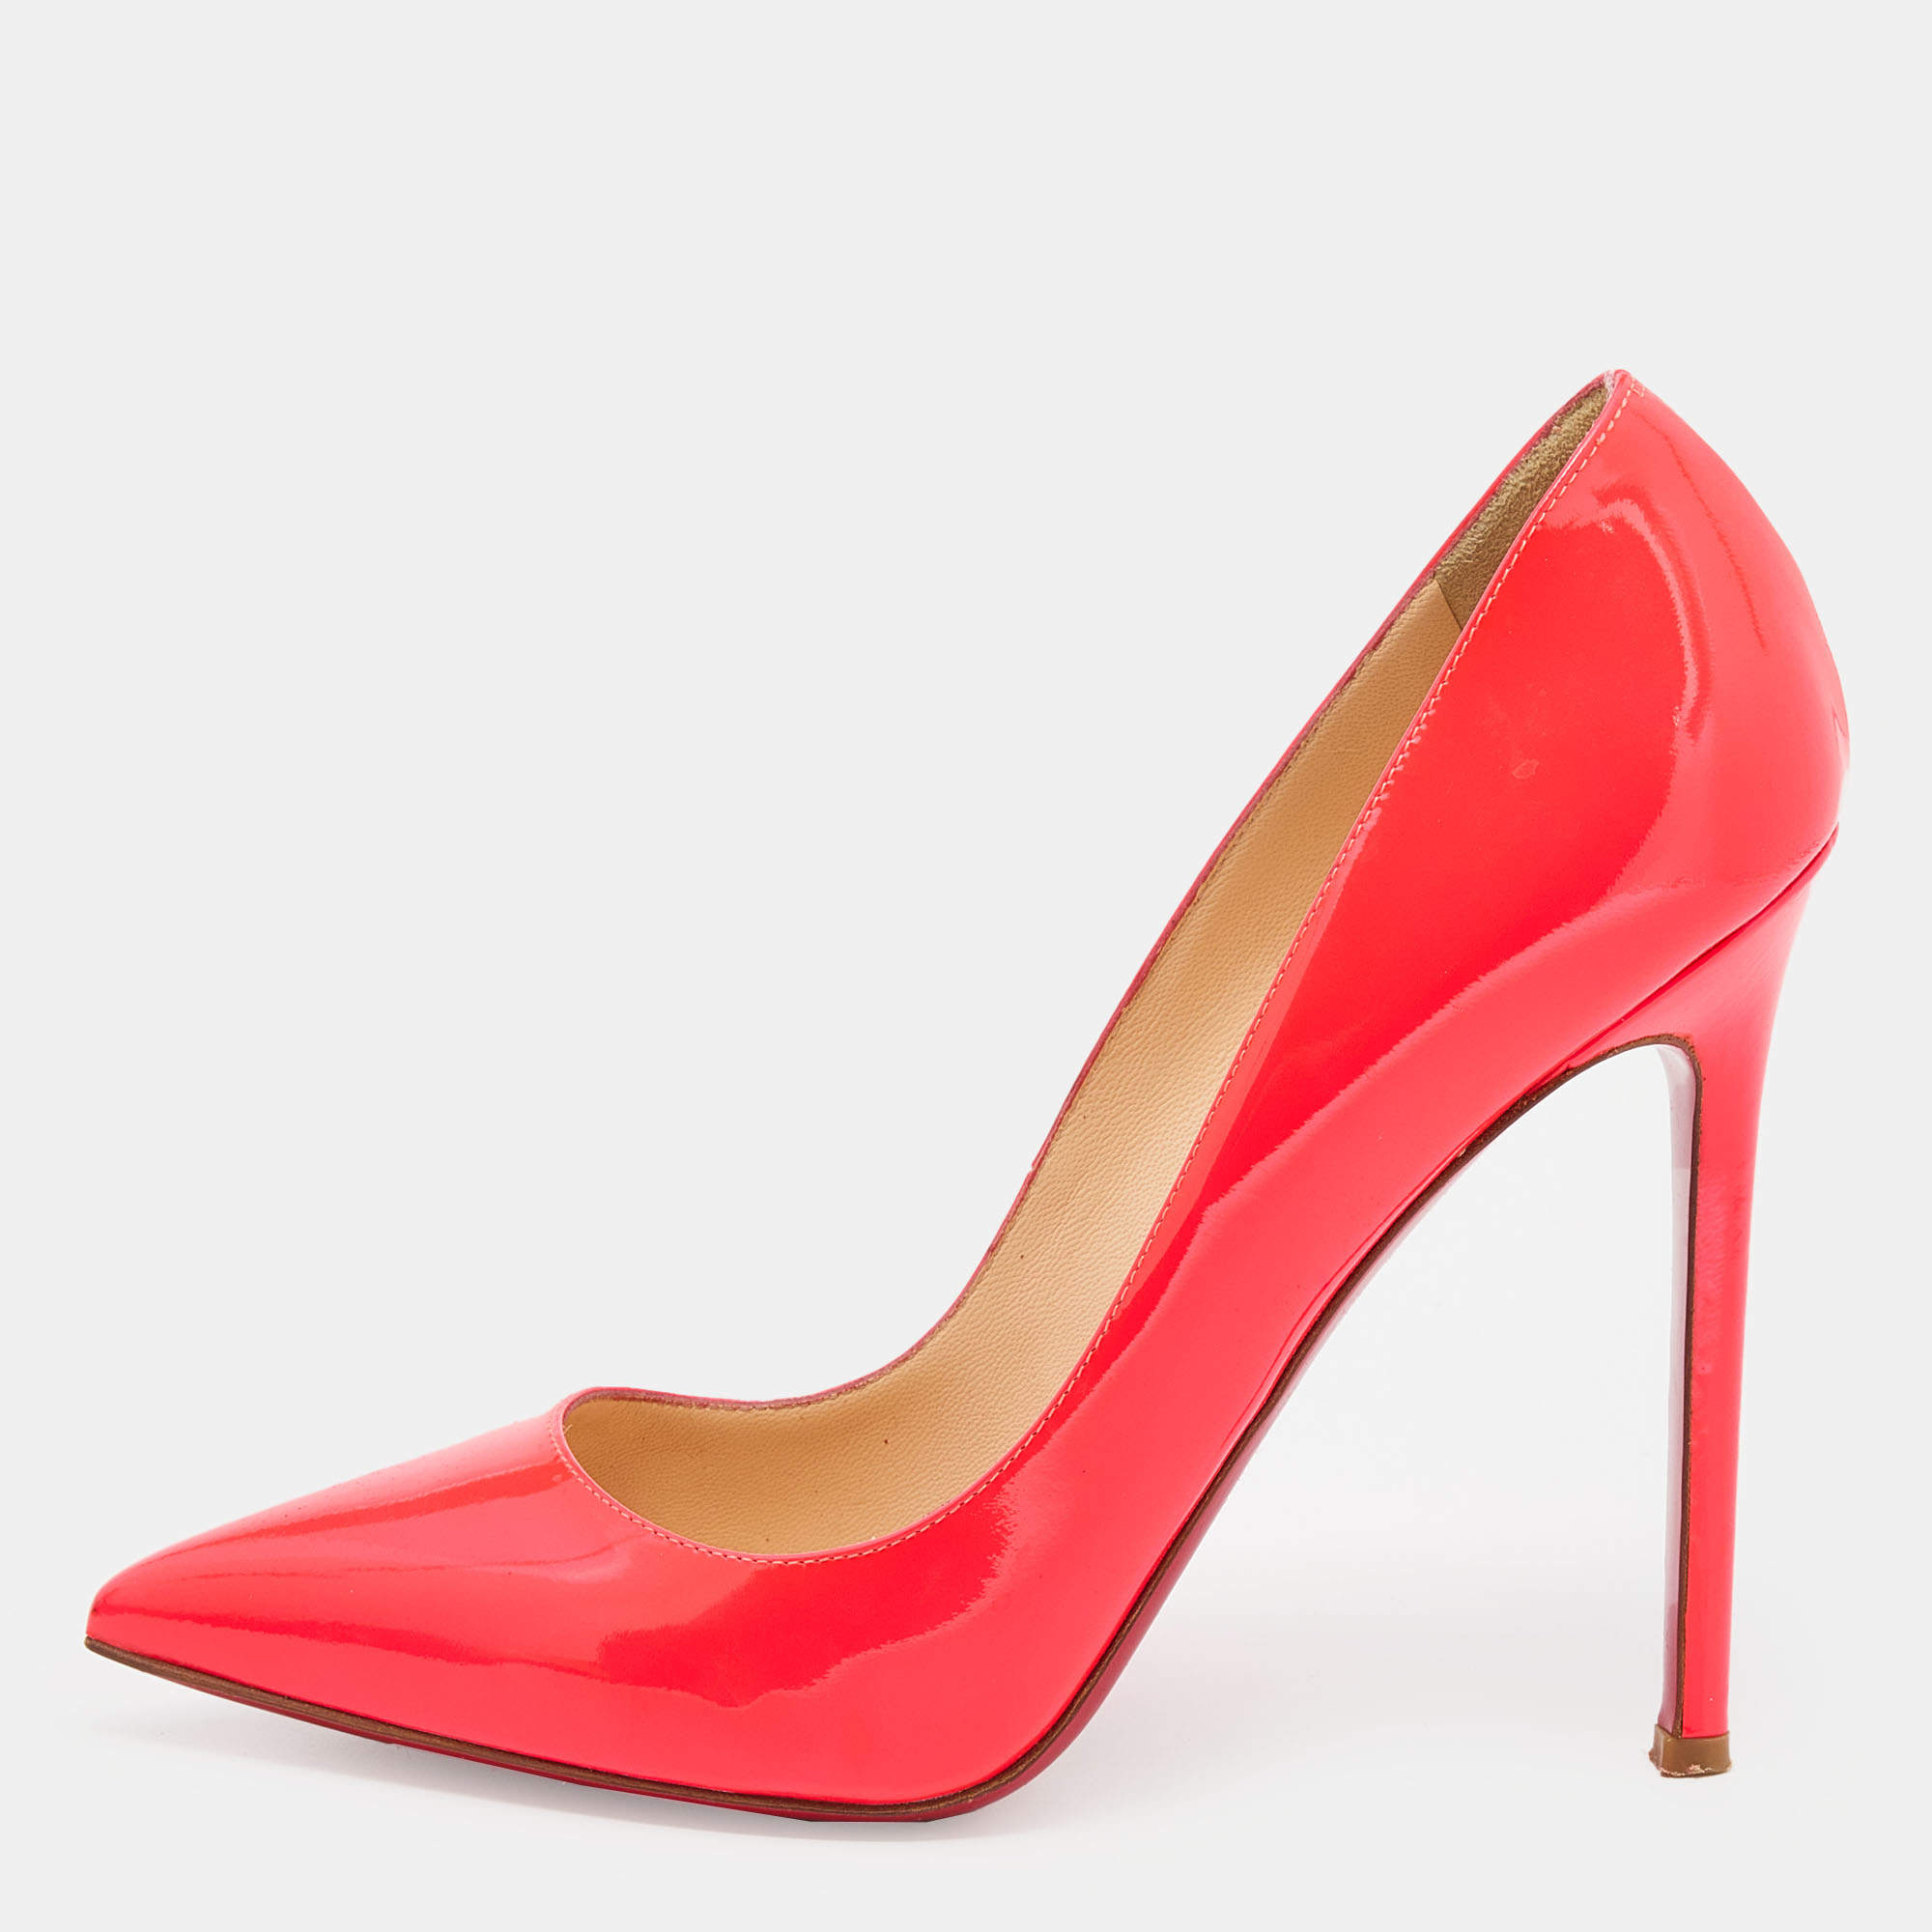 Christian Louboutin Neon Coral Patent Leather So Kate Pointed Toe Pumps Size 39